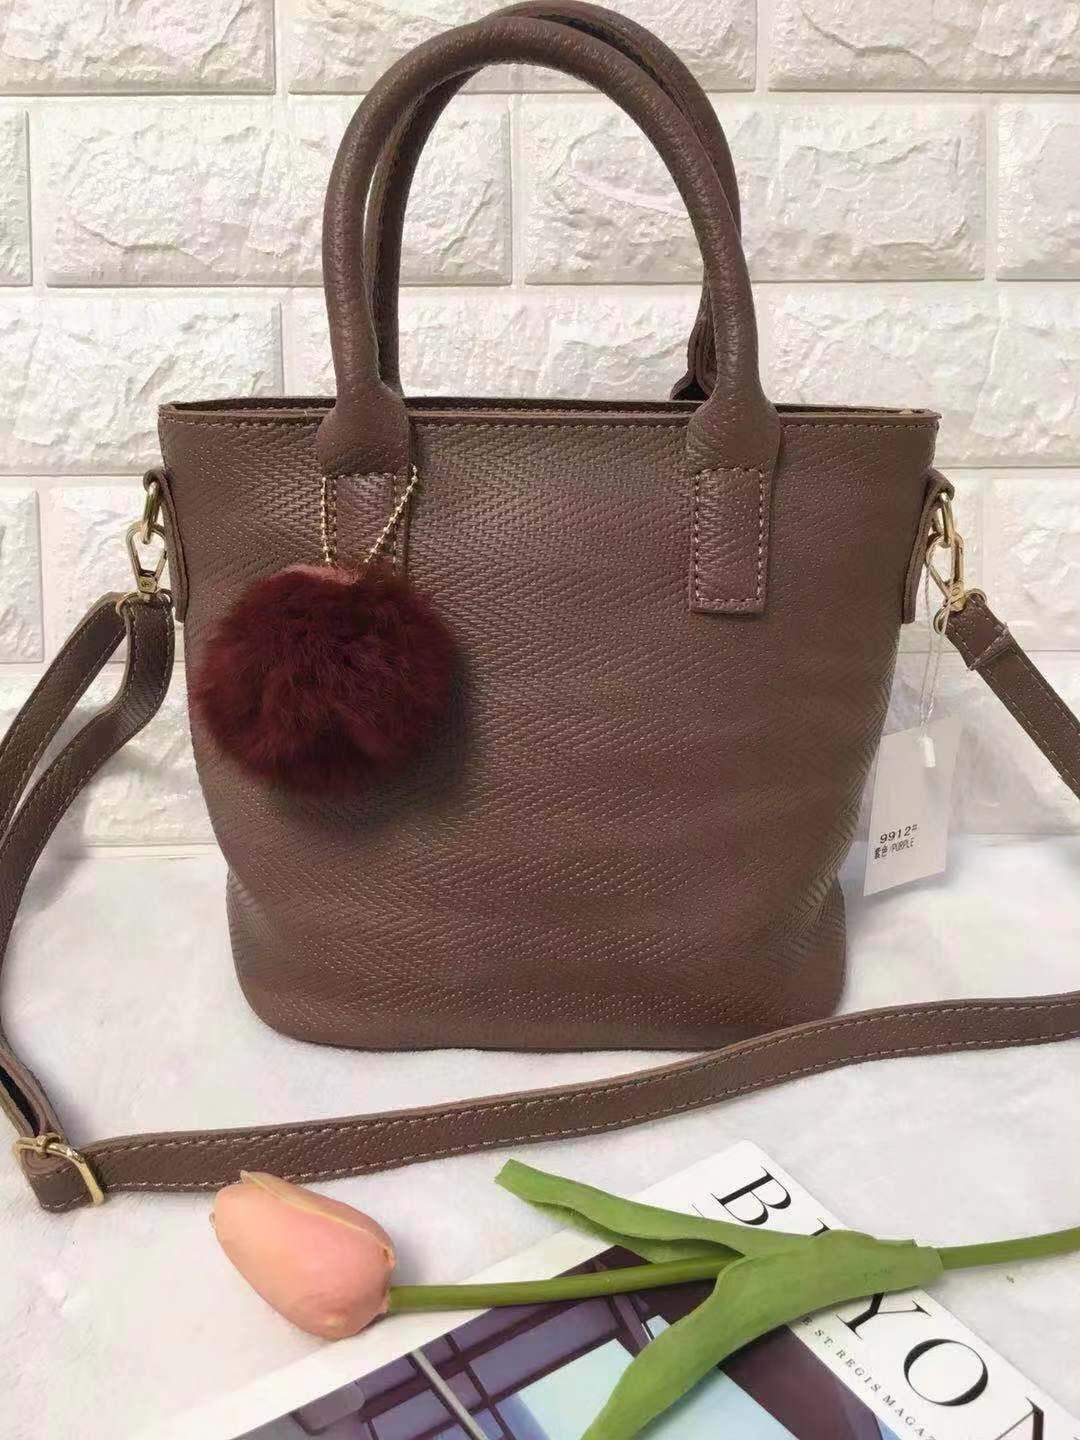 Bags for Women for sale - Womens Bags online brands, prices & reviews in Philippines | comicsahoy.com